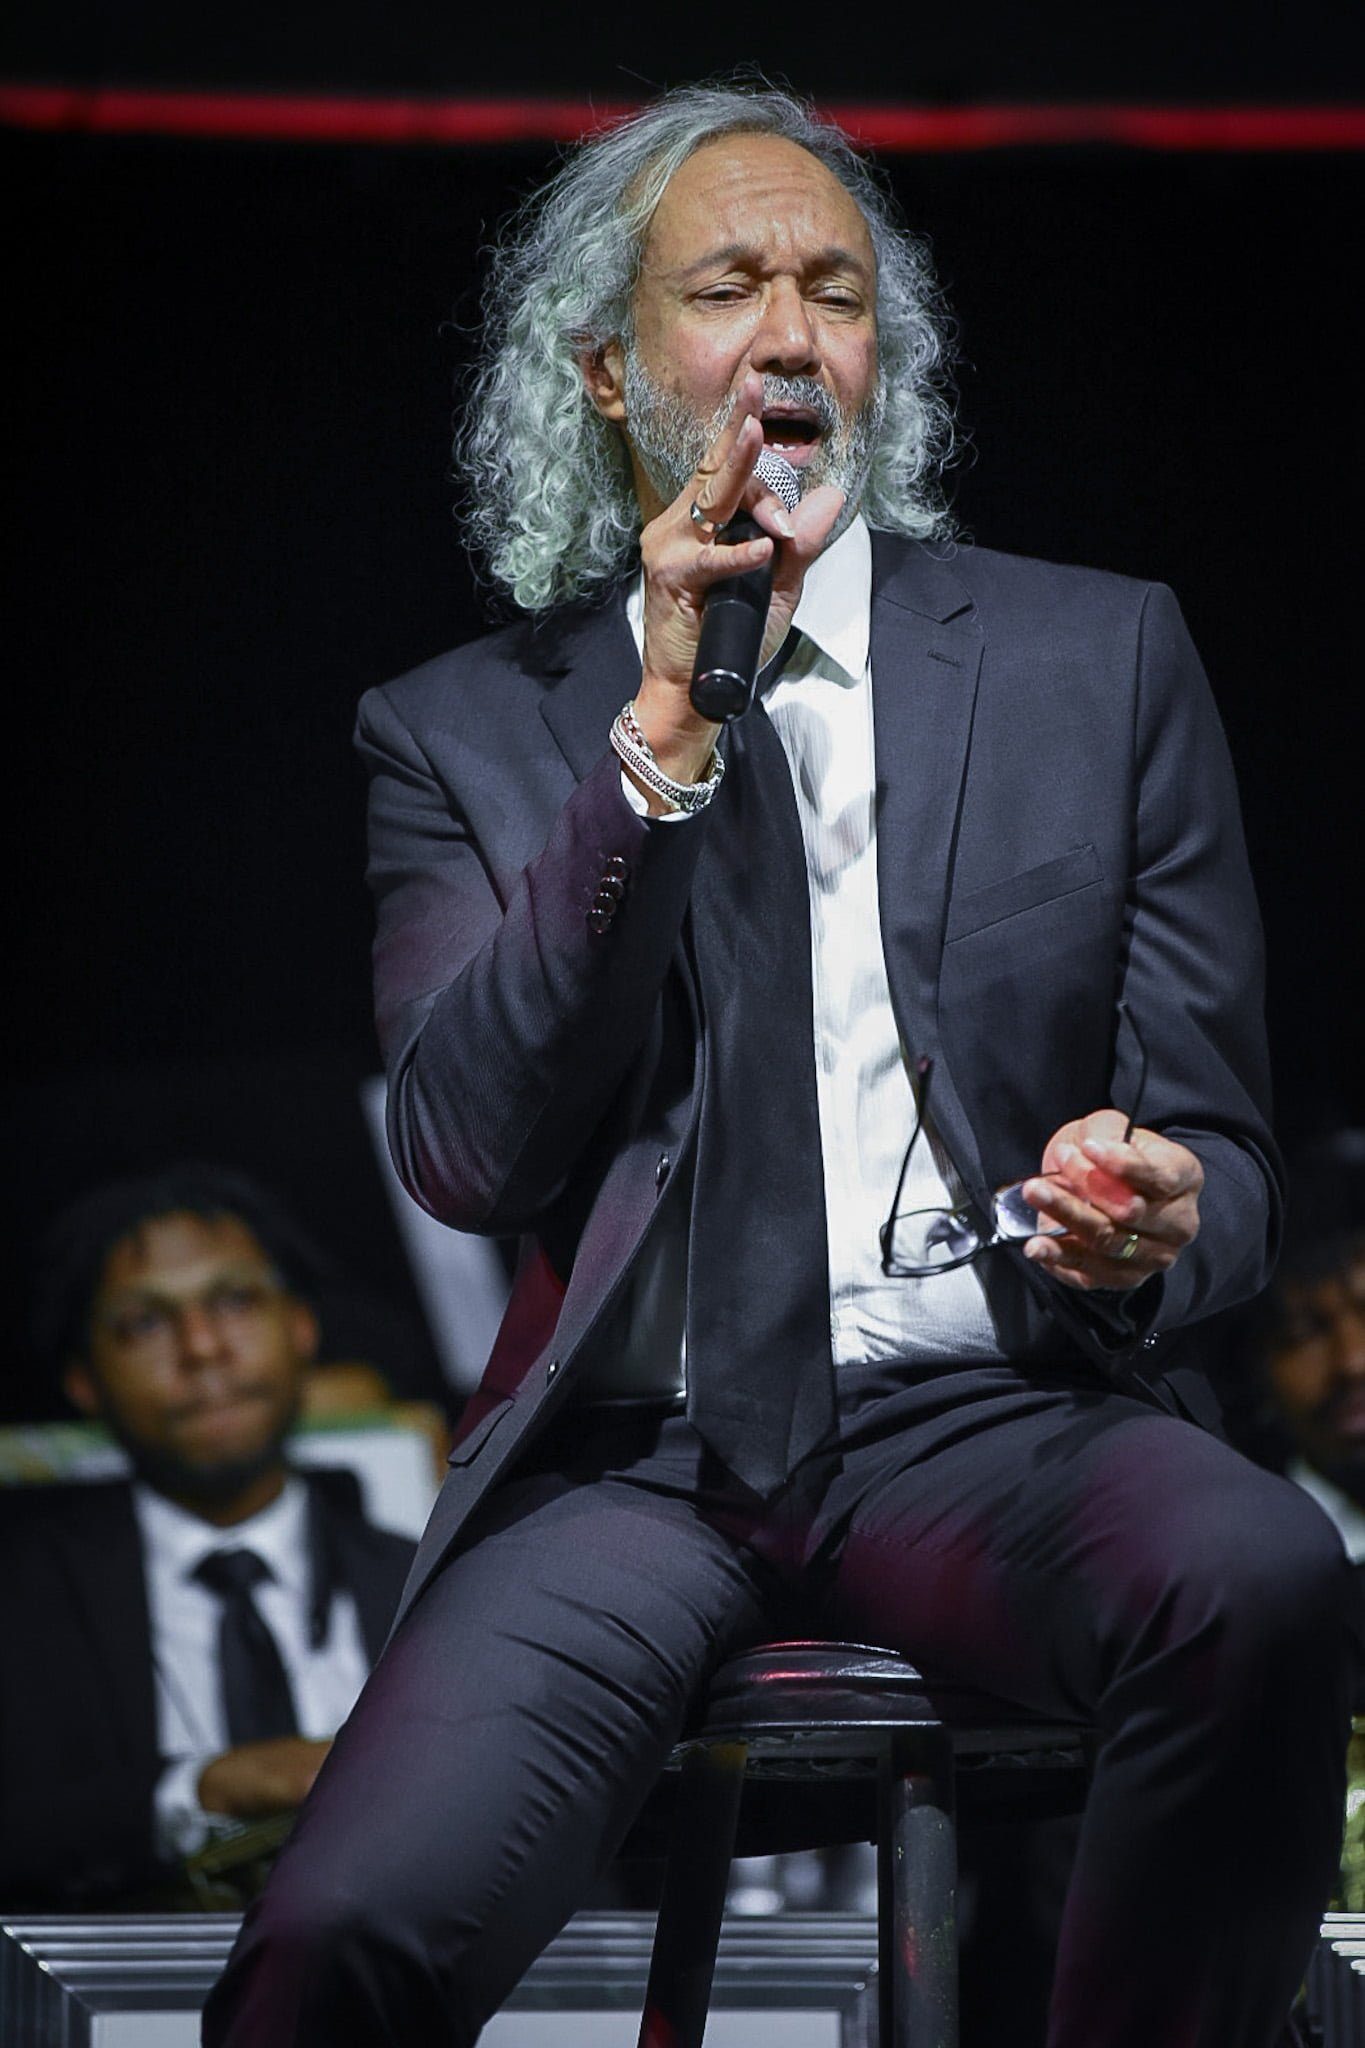 Darryl Tookes in a gray suit sings into a microphone